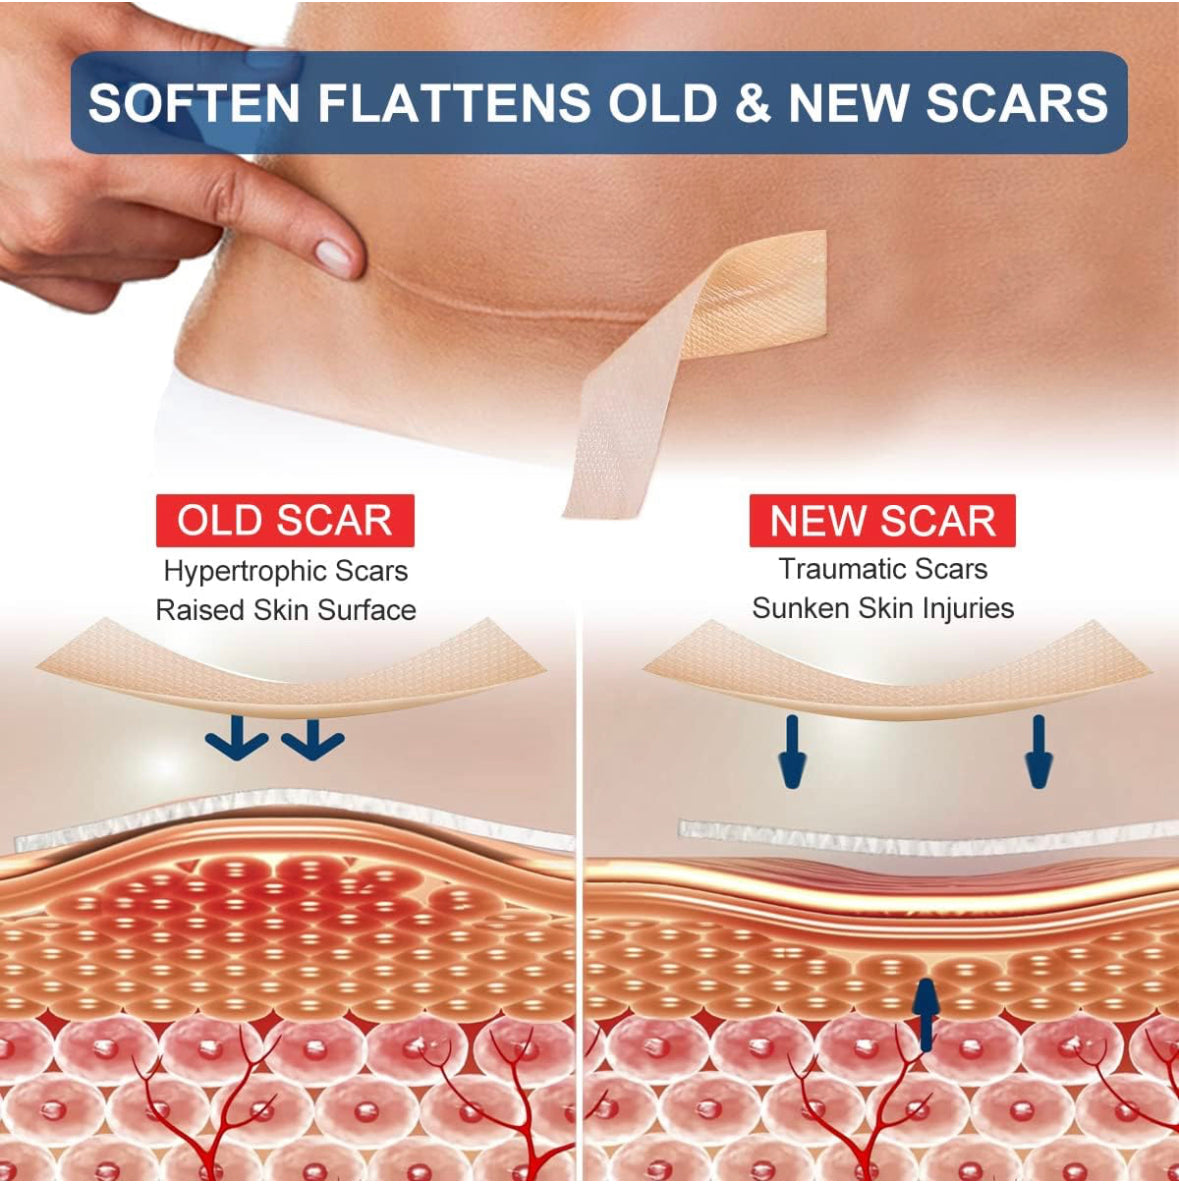 Silicone Scar Sheets (1.6” x 120” Roll-3M).